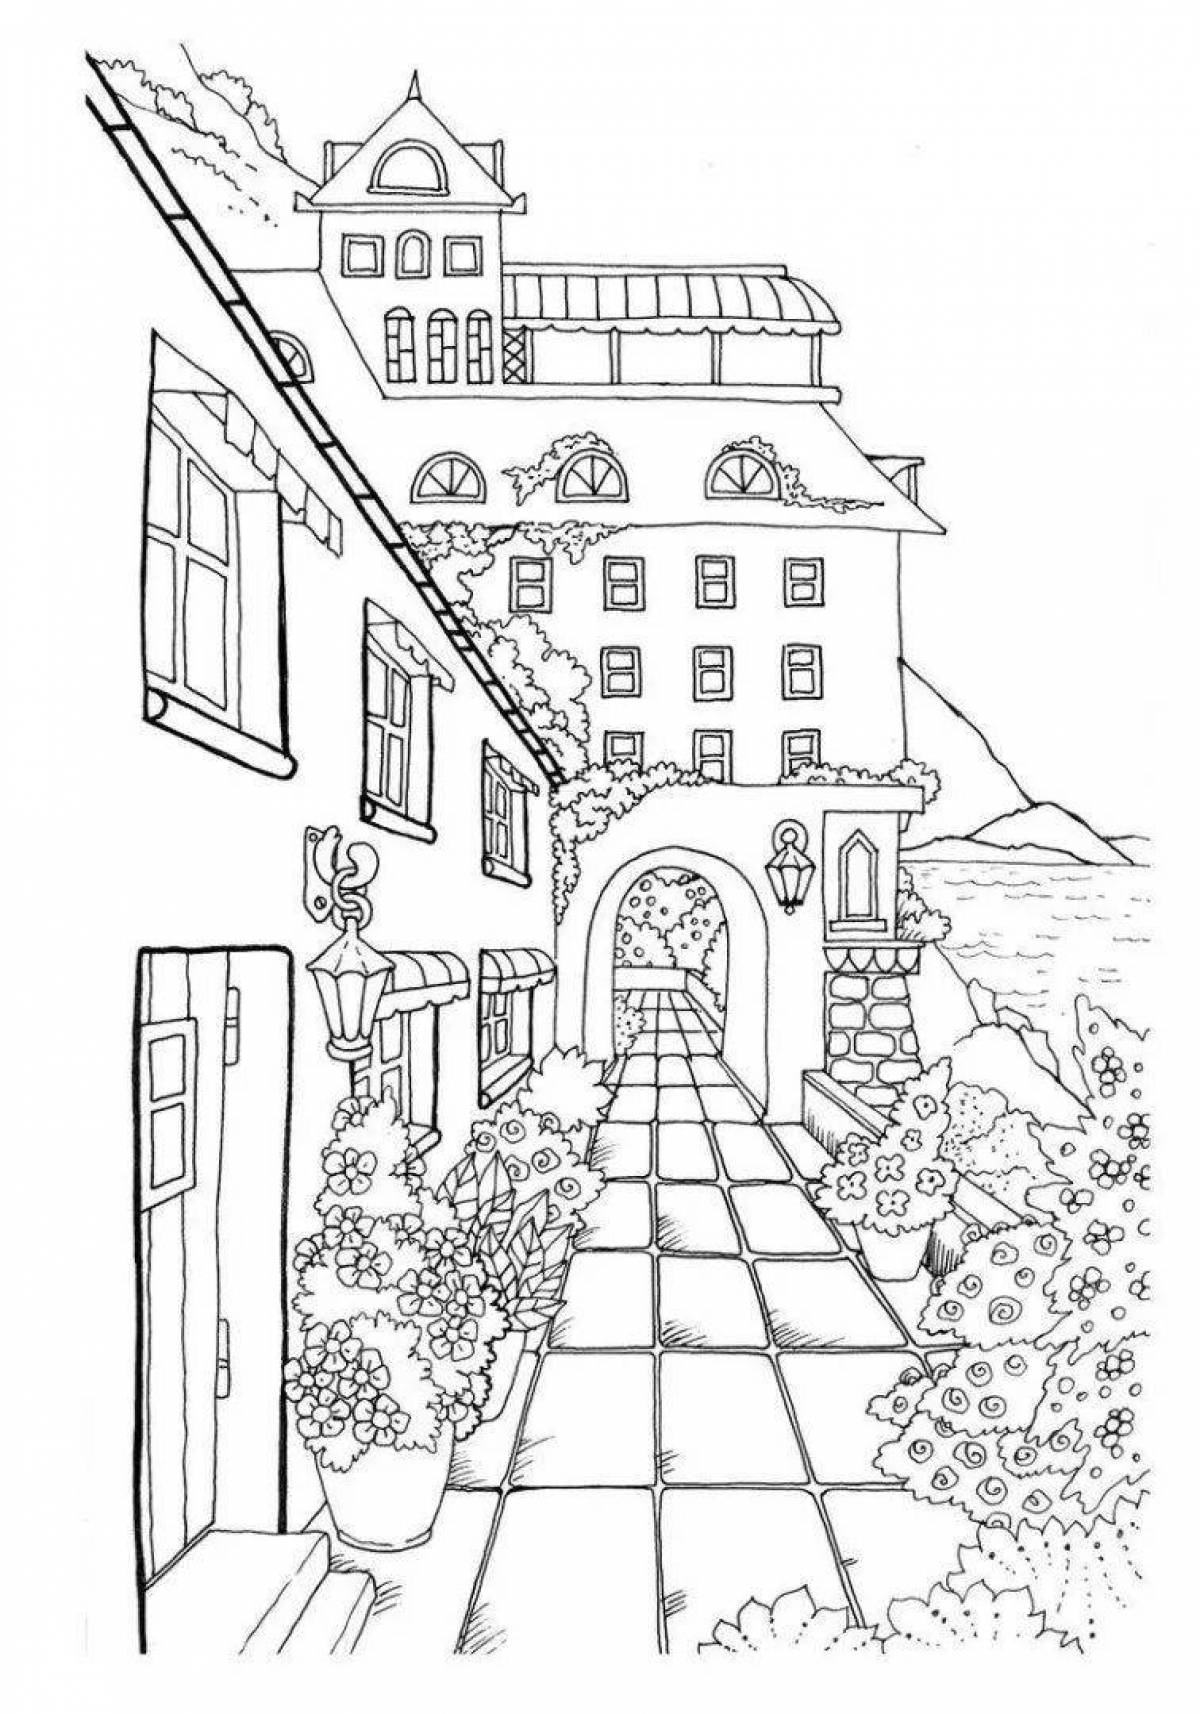 Coloring page joyful city street for kids